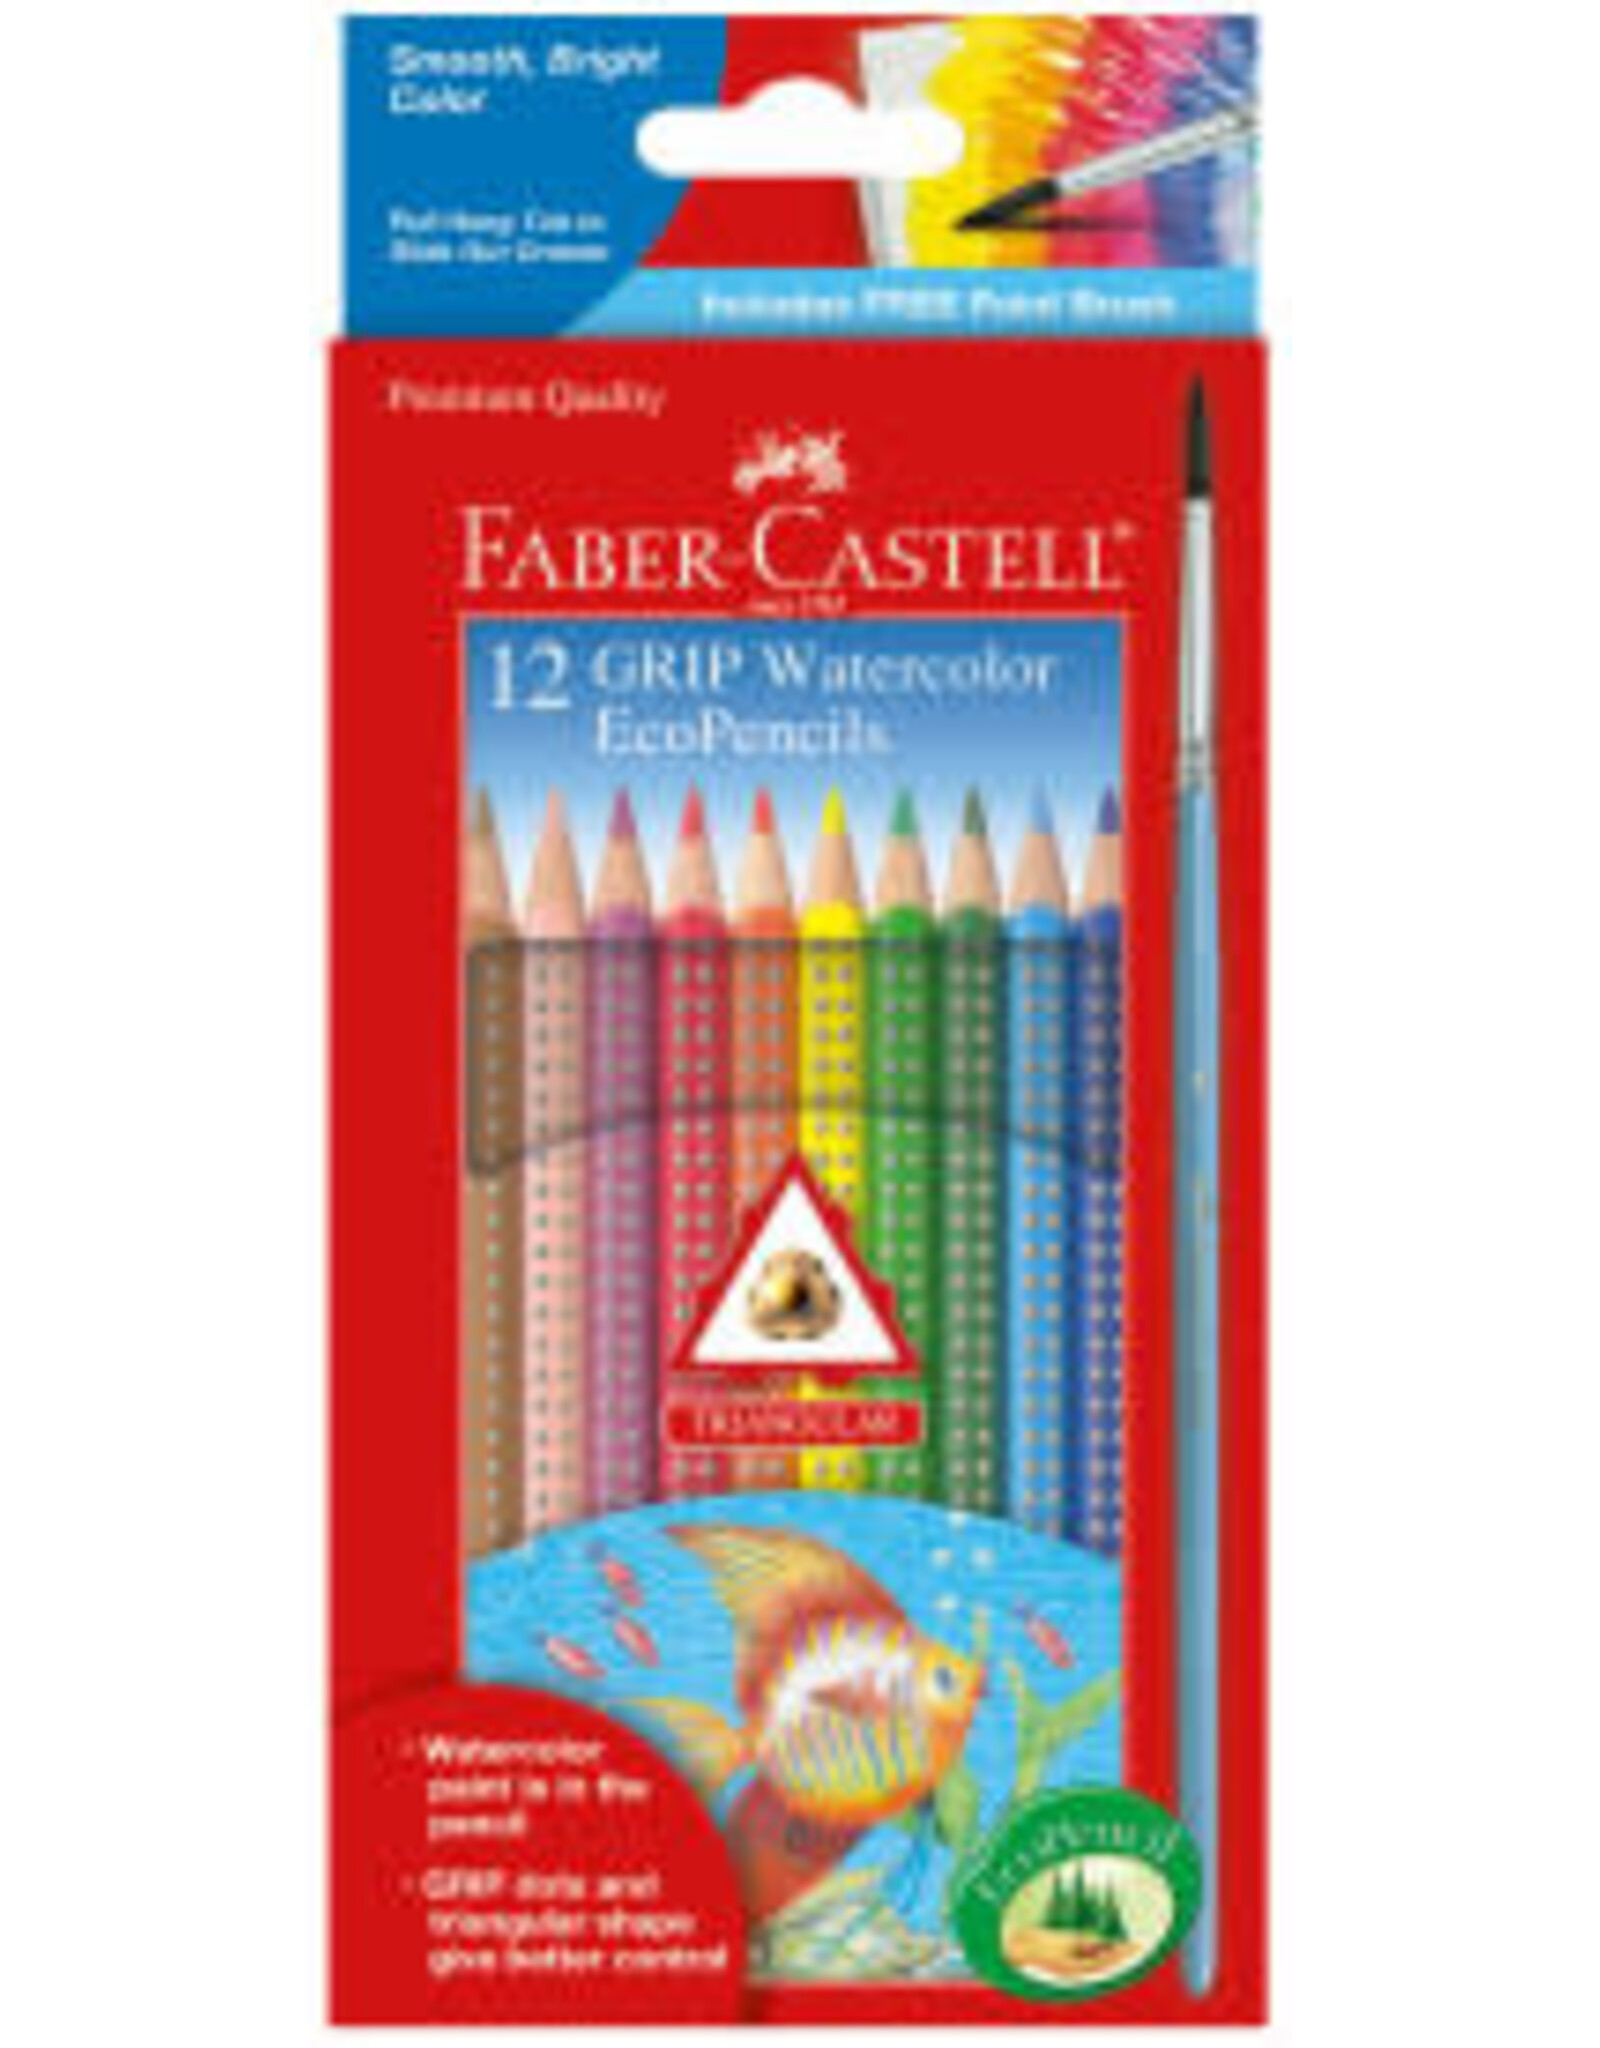 Faber-Castell 12ct Grip Watercolor EcoPencils